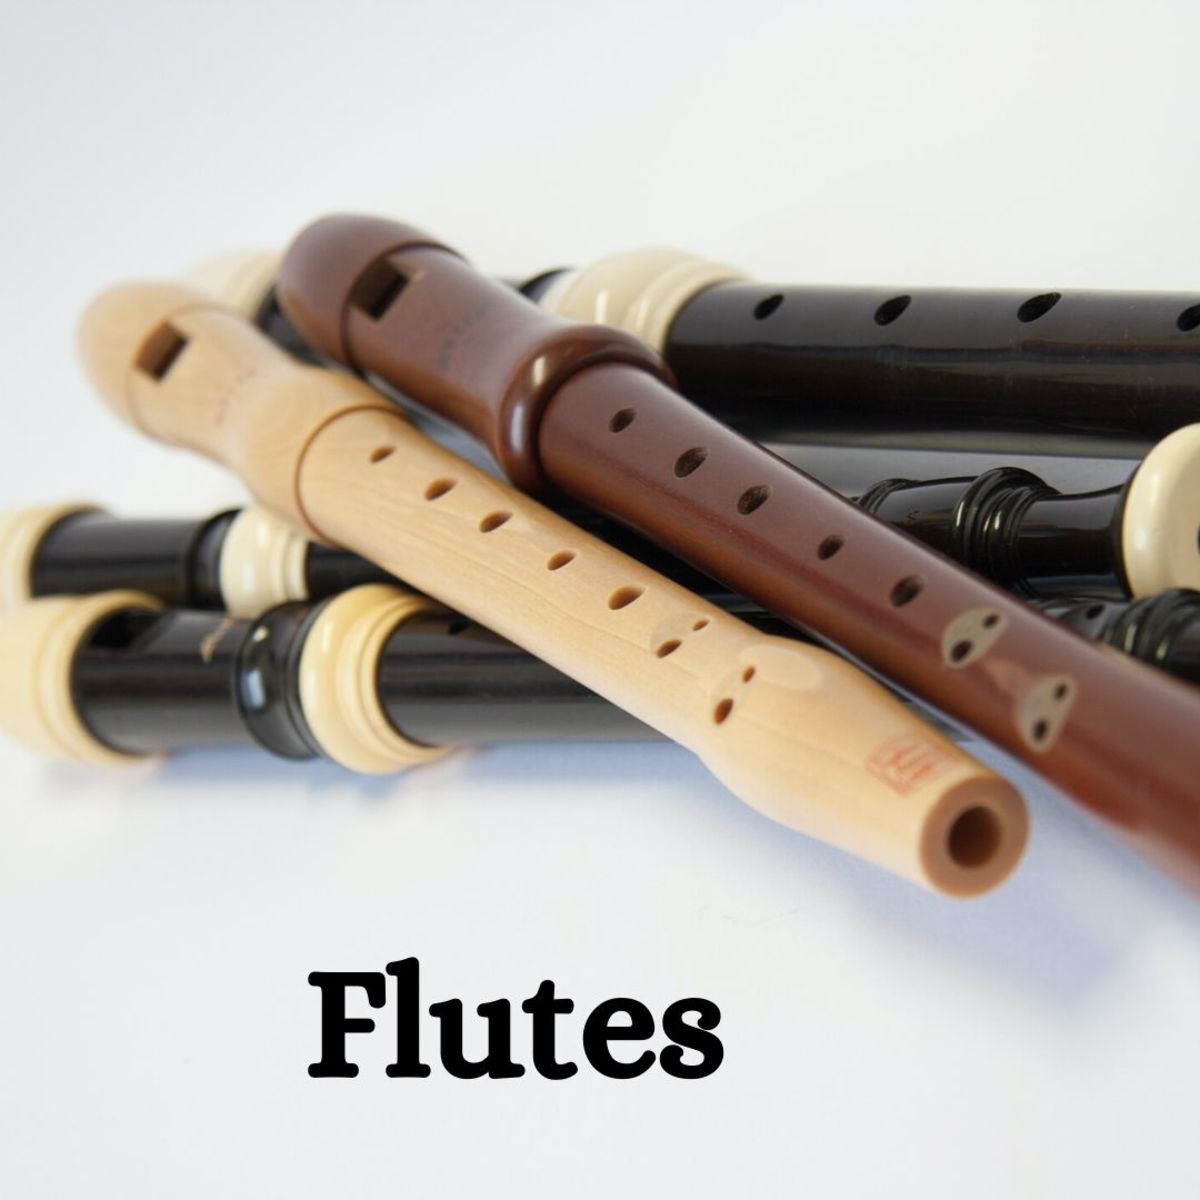 Flutes are beautiful woodwind instruments—totally worth collecting!